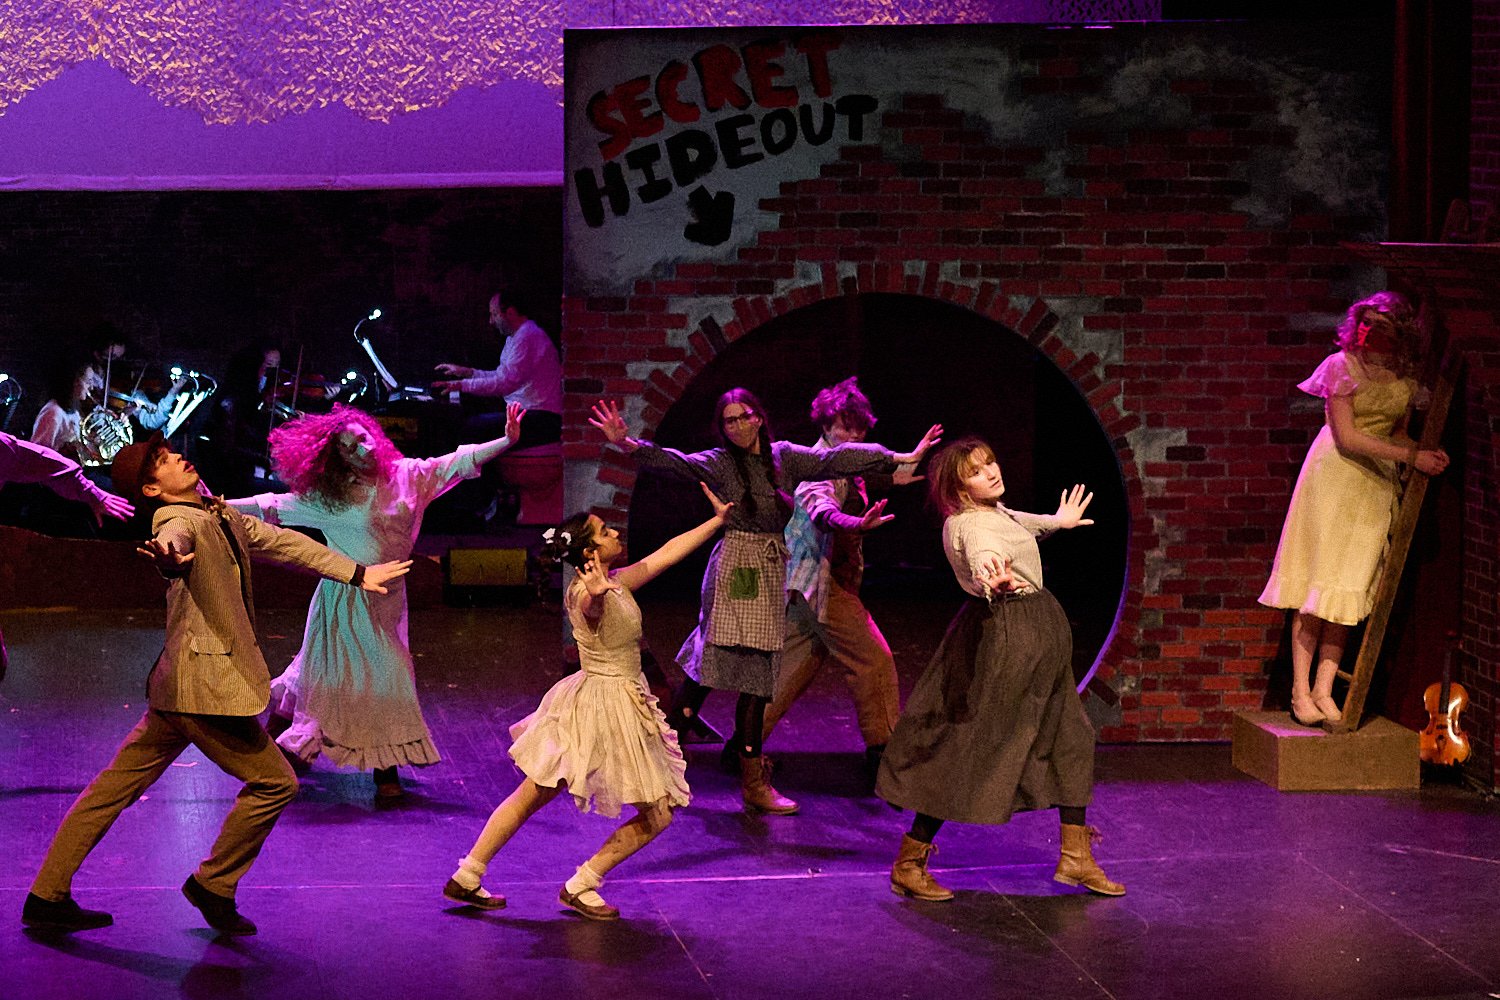  SEWICKLEY, PA, USA - MARCH 2ND 2022: High School students of Sewickley Academy are performing in an annual musical show “Urinetown” running on March 3rd-5th 2022. Alaina Ohr 